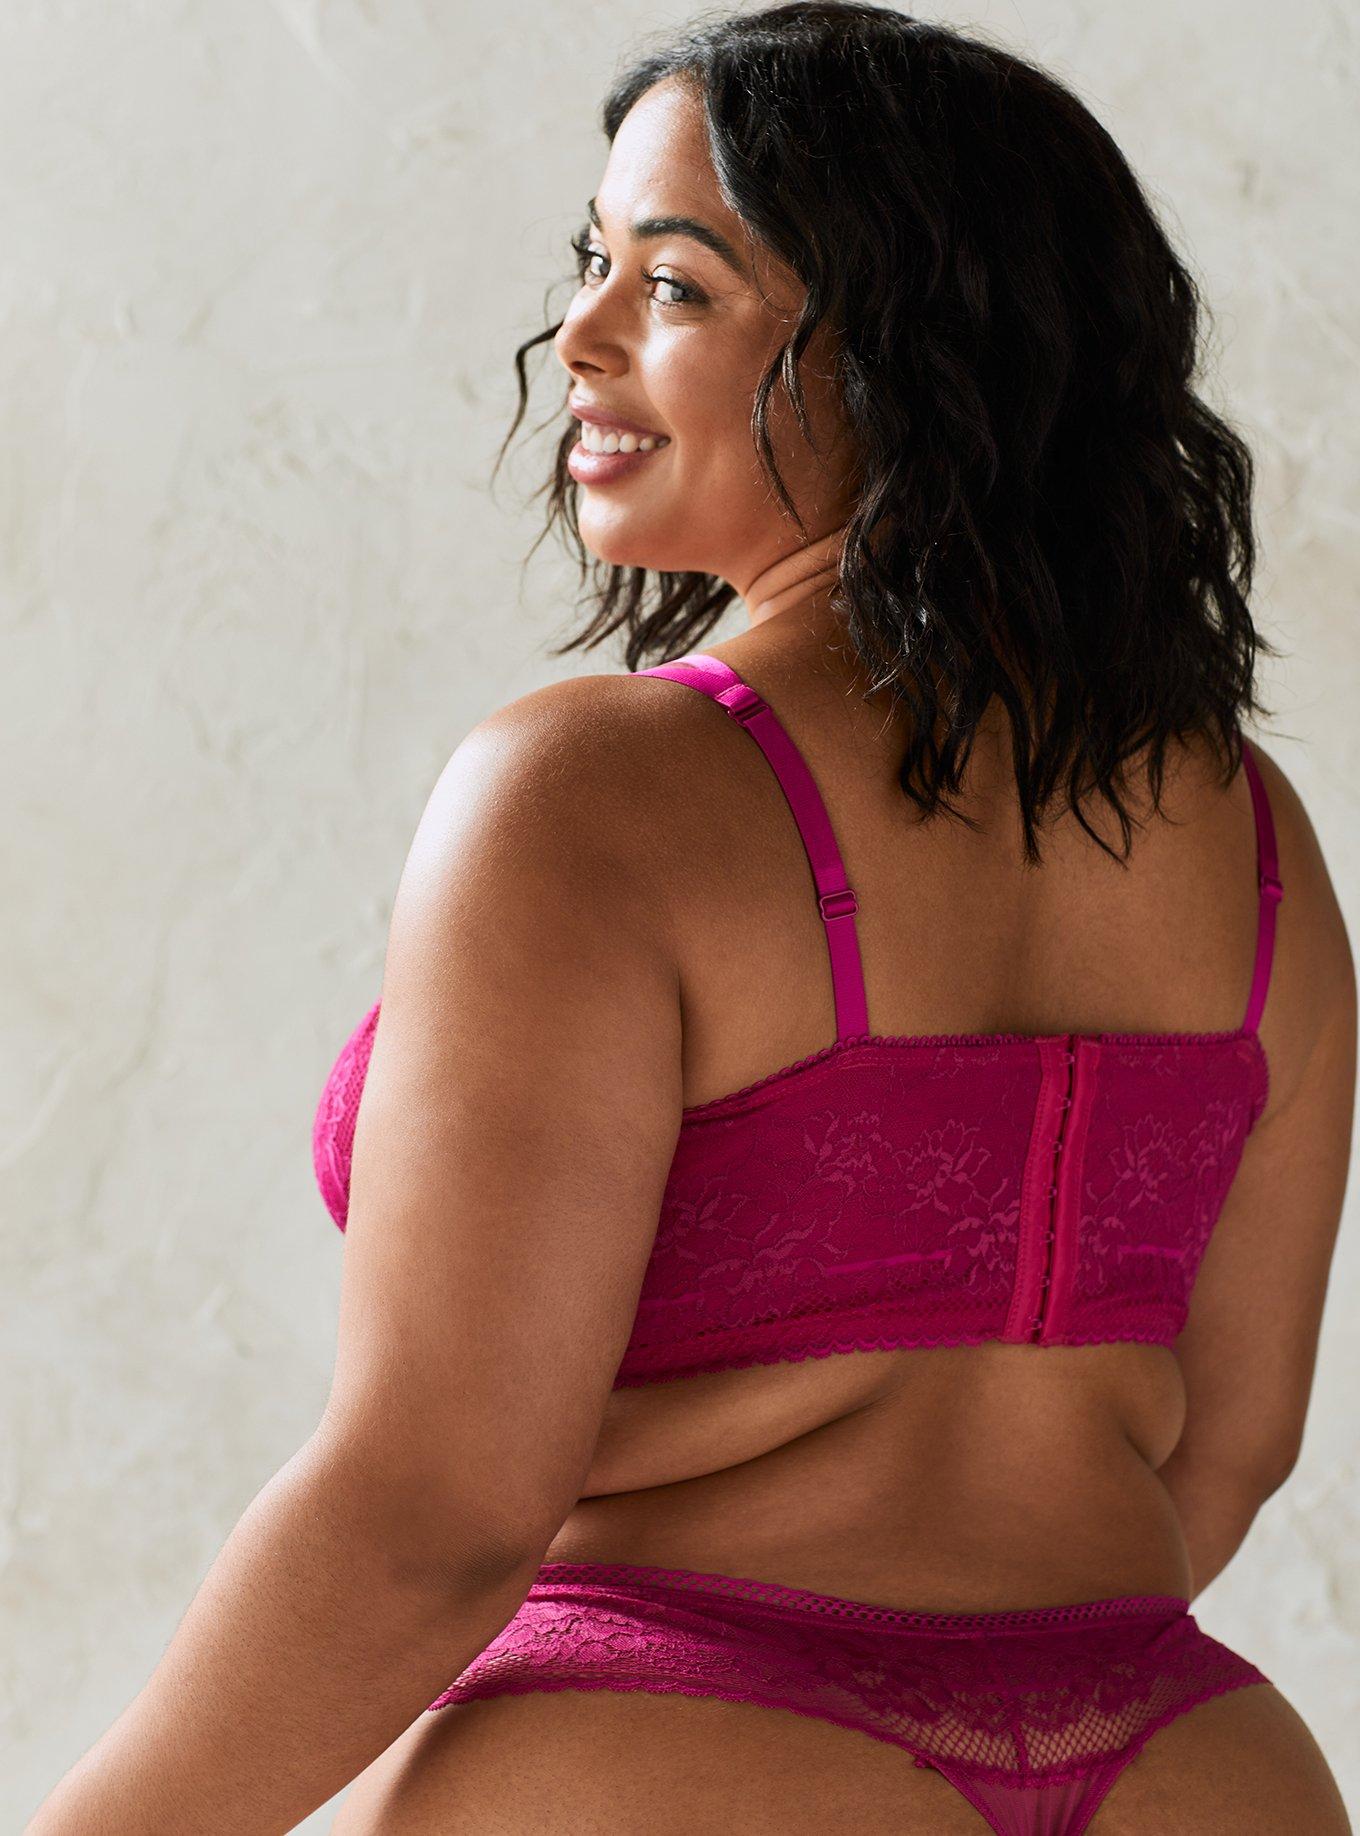 Torrid Size 2 Bralite Unlined 4-Way Stretch Lace Bralette - Rose Pink - $14  - From Phoebe